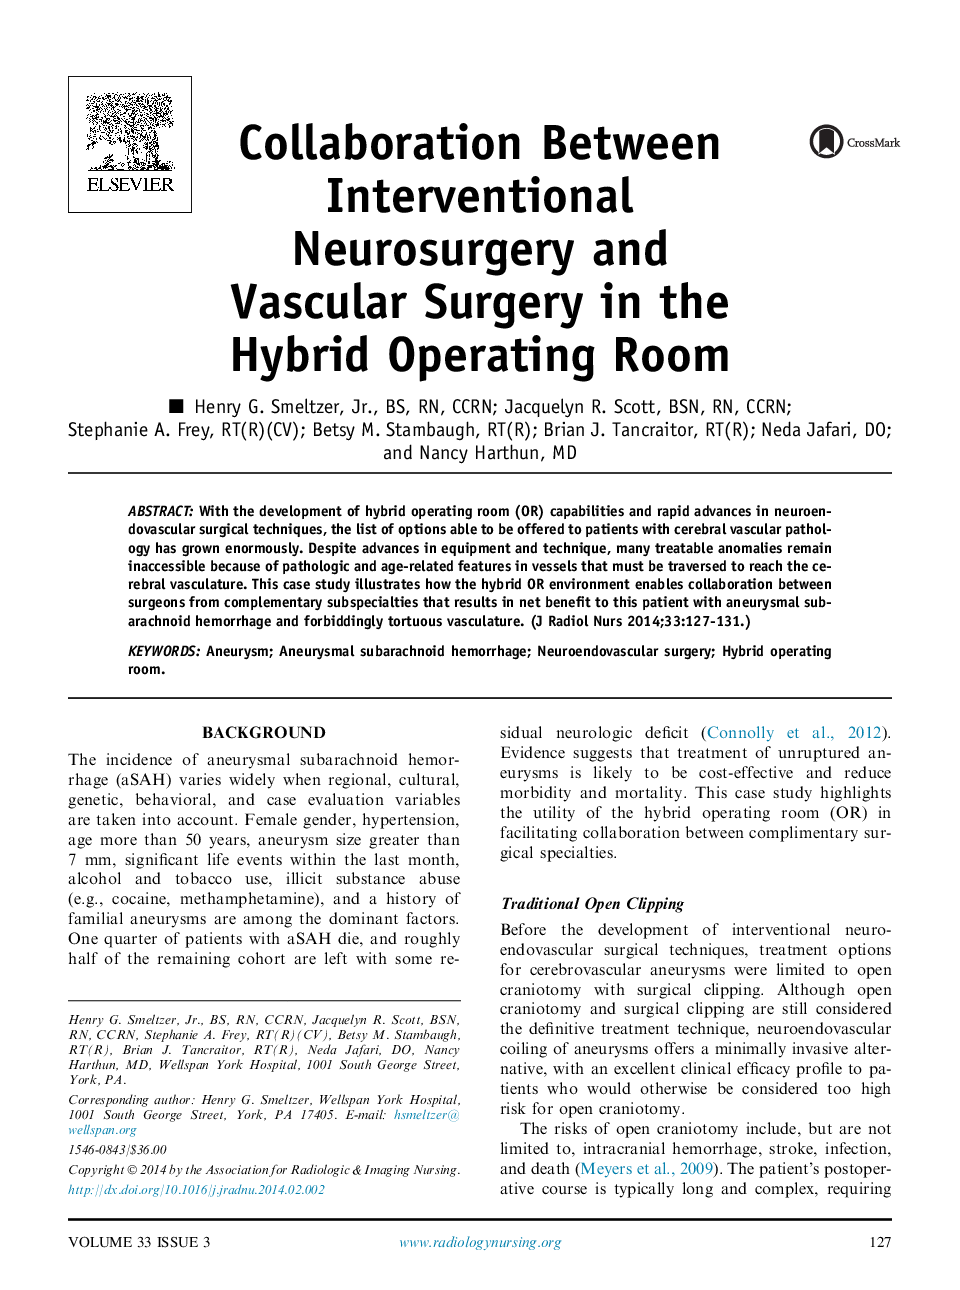 Collaboration Between Interventional Neurosurgery and Vascular Surgery in the Hybrid Operating Room